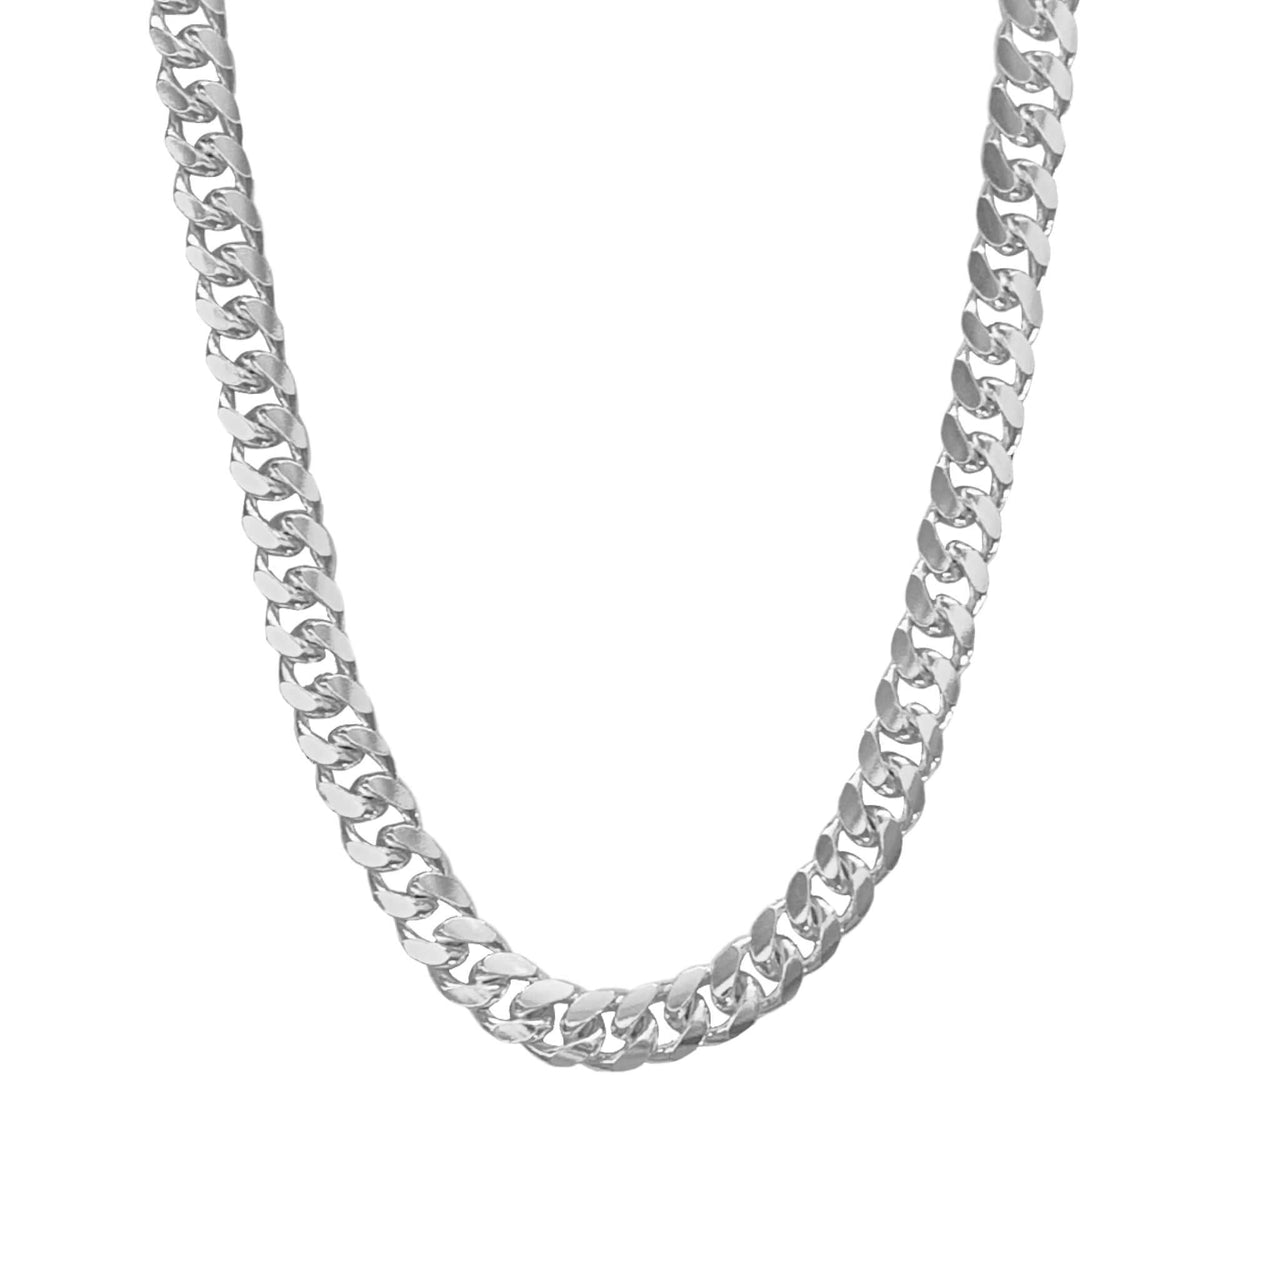 Silver Cuban Link Chain 6mm Silver Necklace Men's 